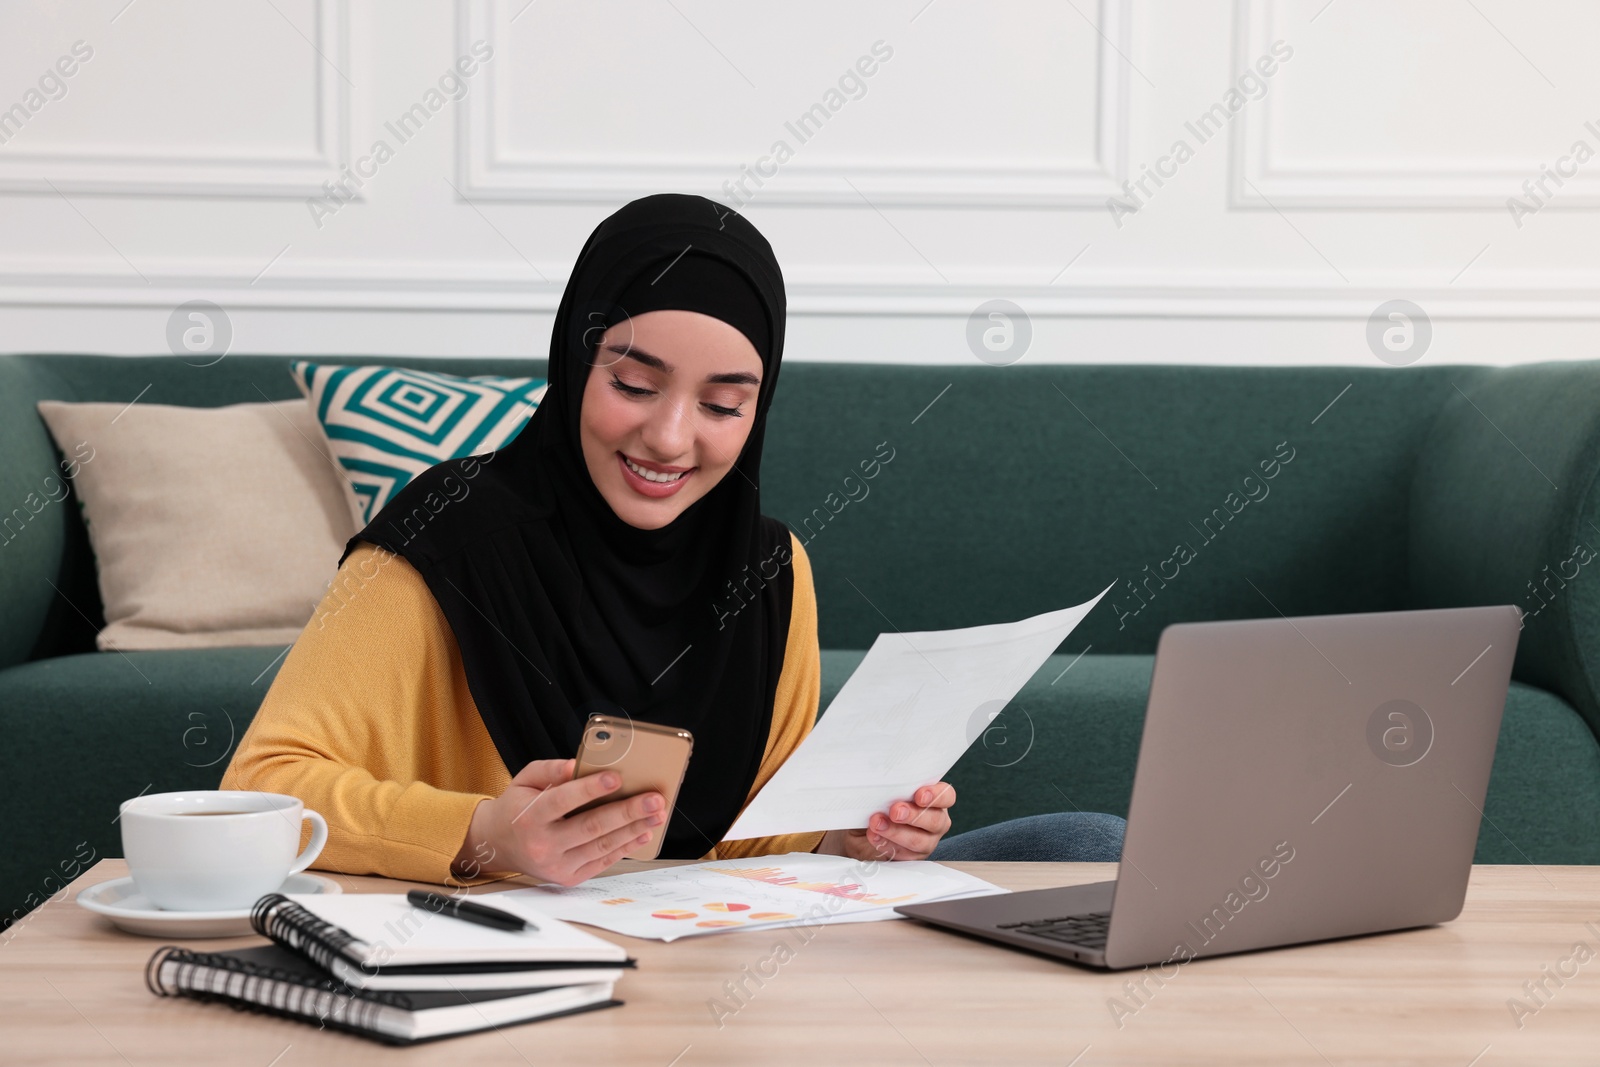 Photo of Muslim woman in hijab using laptop and smartphone at wooden table indoors